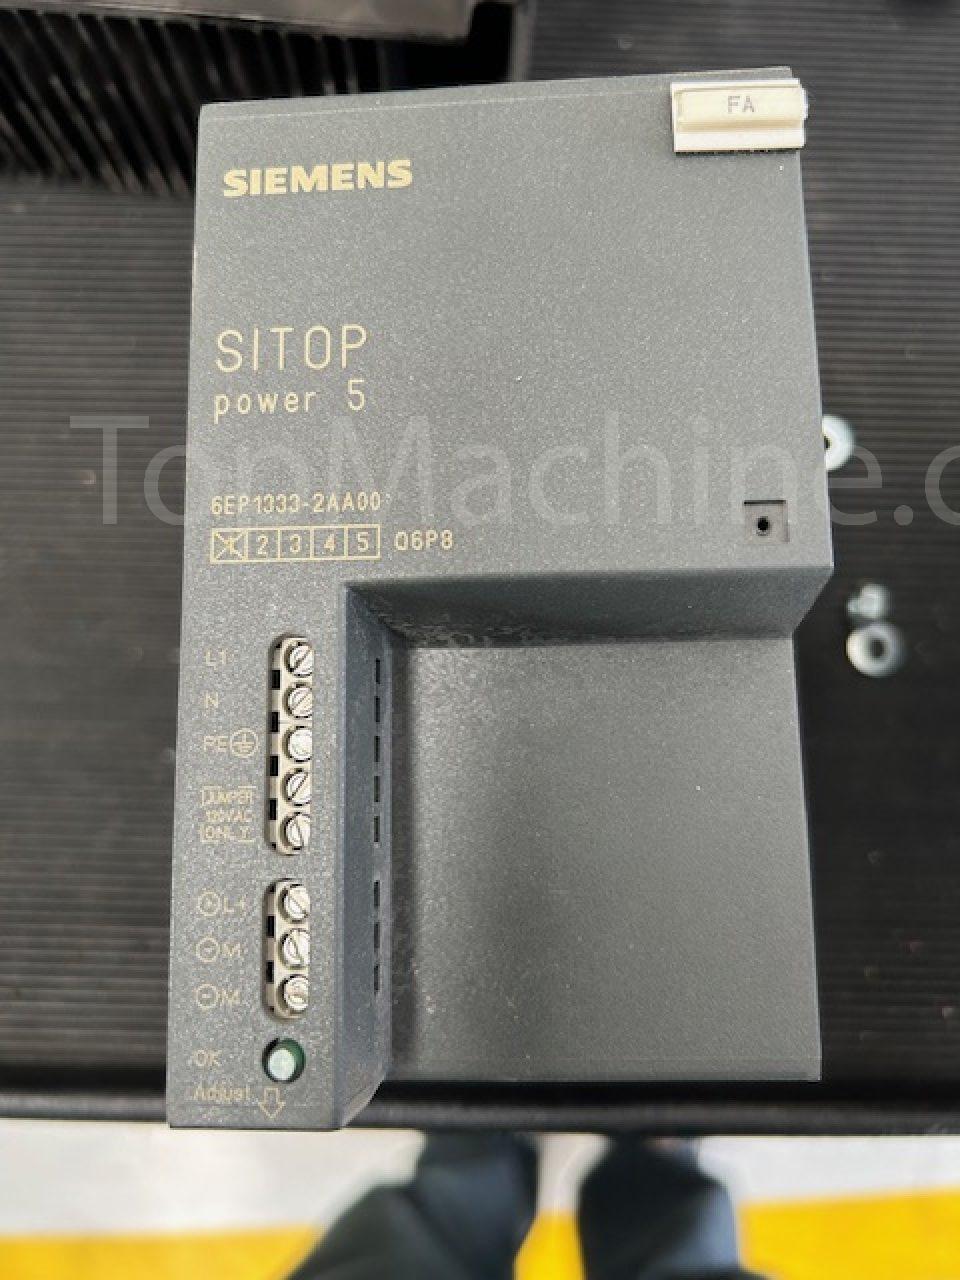 Used Siemens Sitop Power 5 Spares Electrical